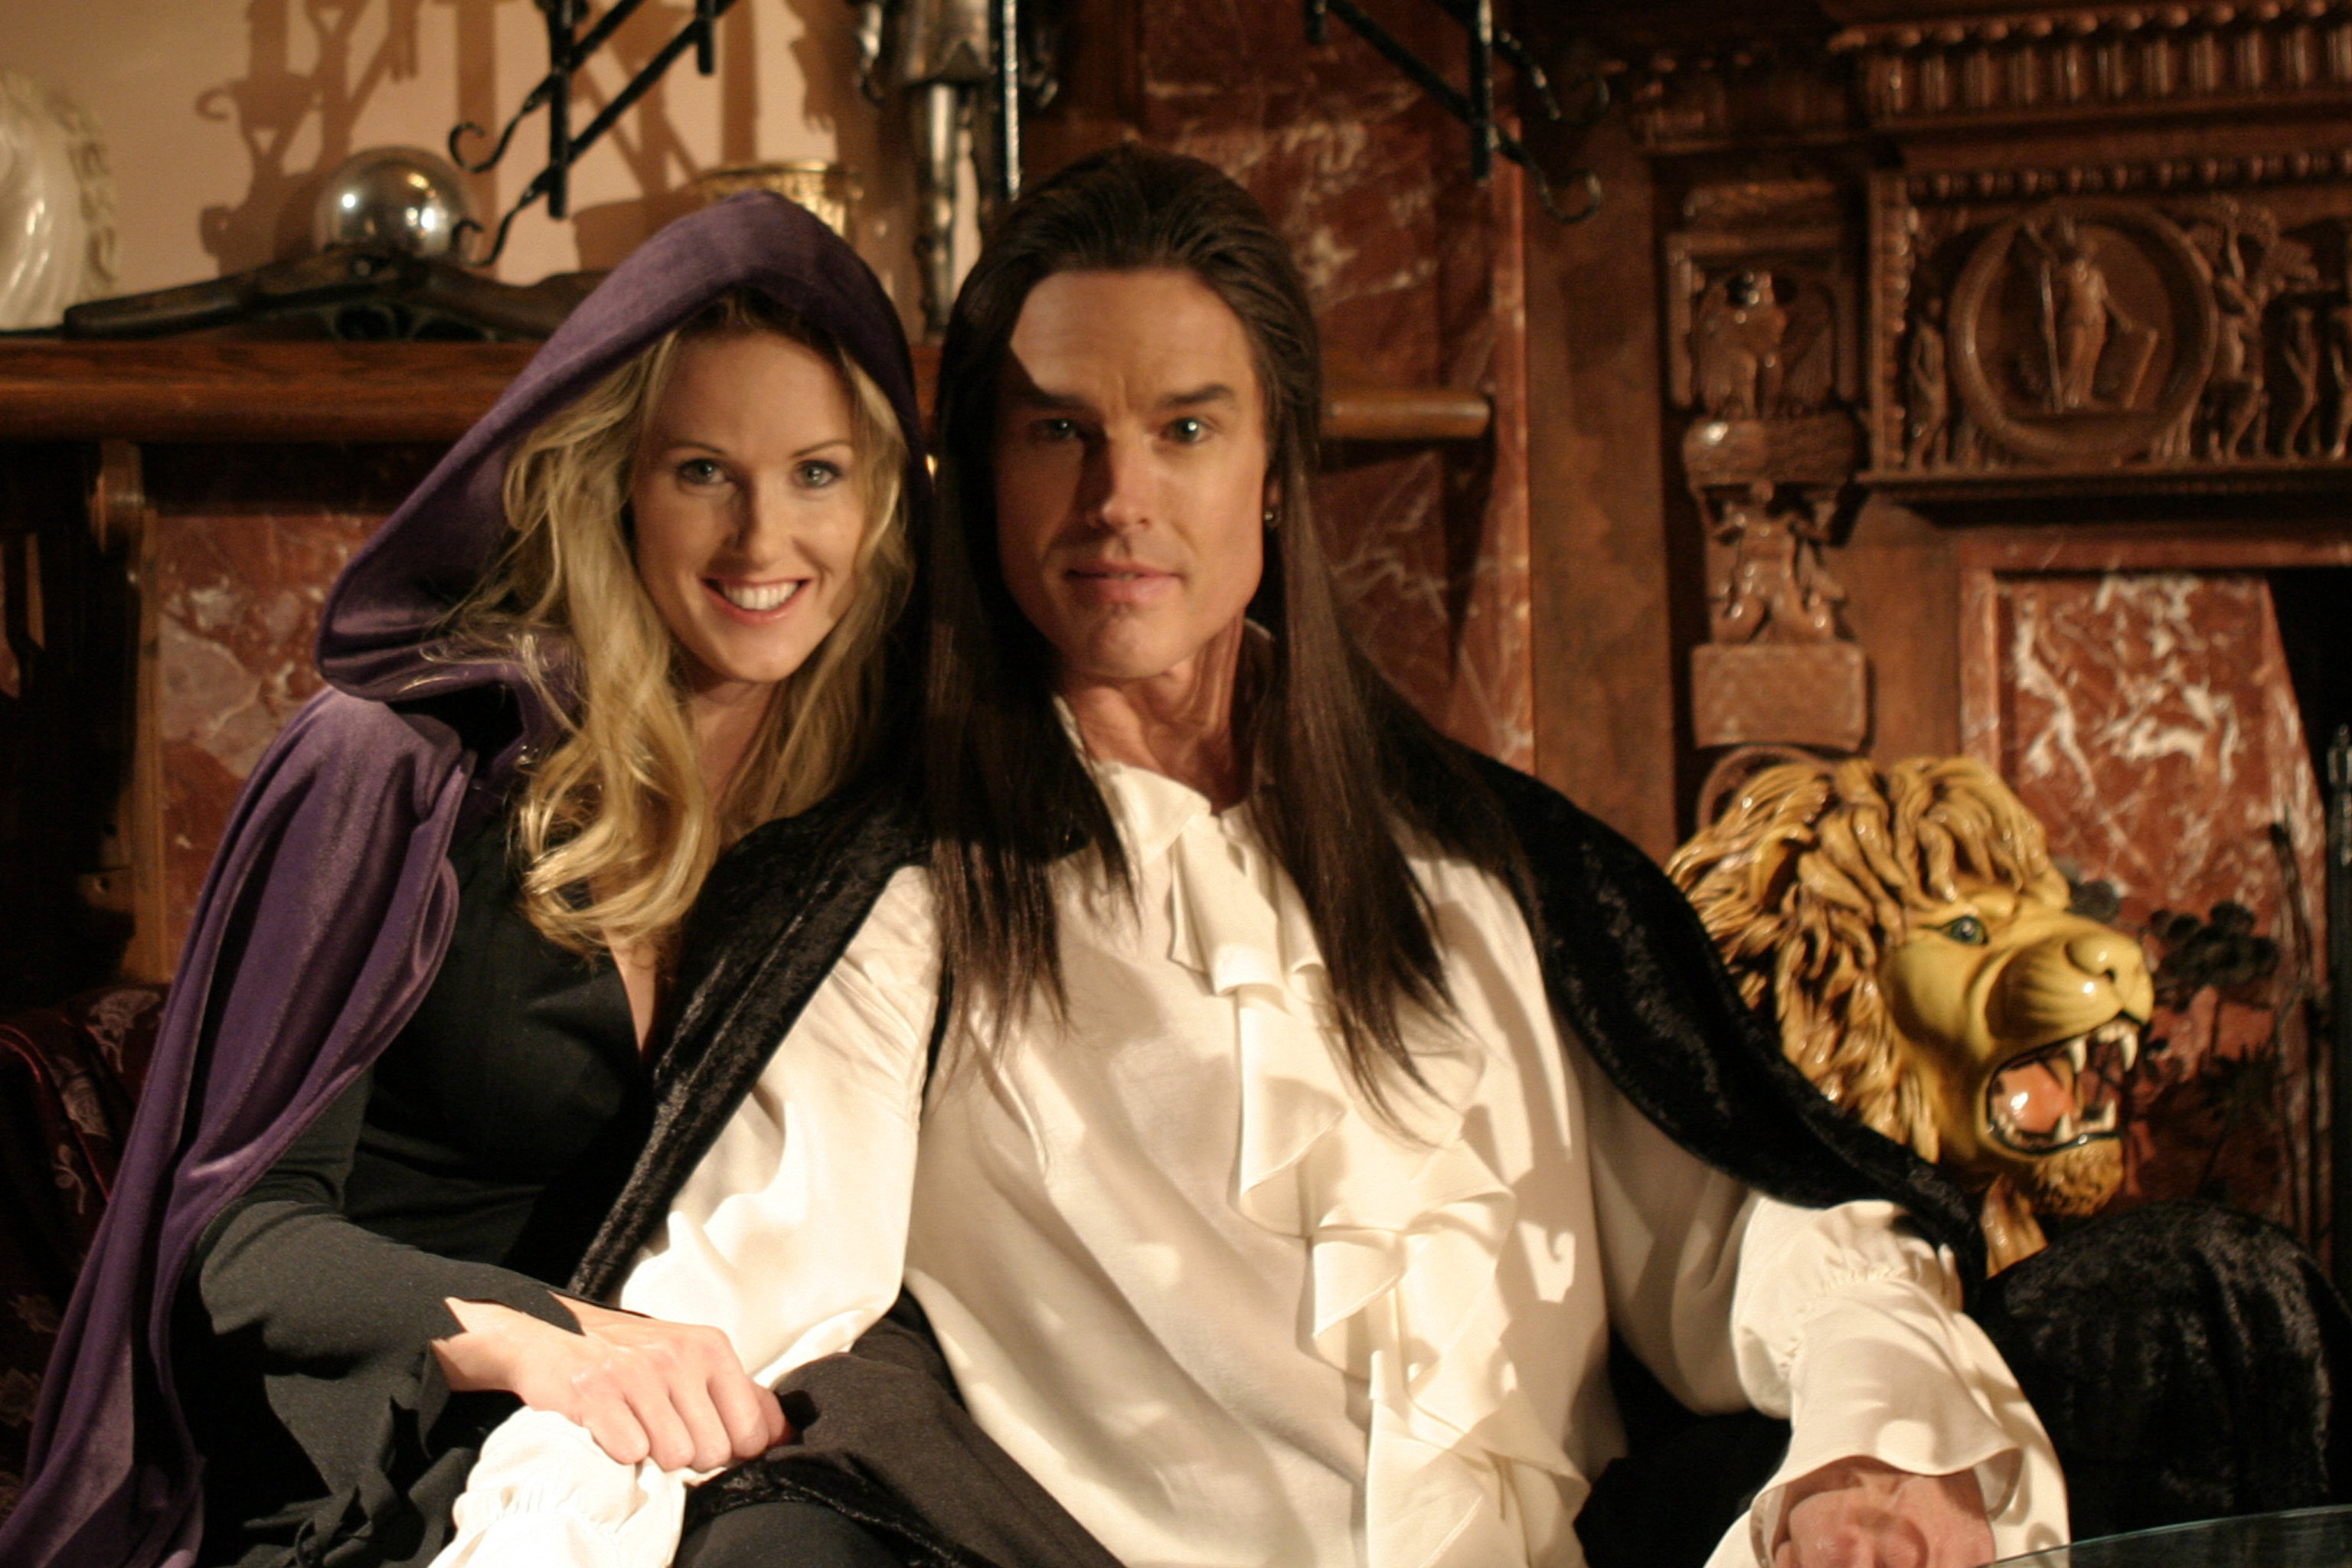 Ronn Moss is Count Dracula with Erica Hanson in 